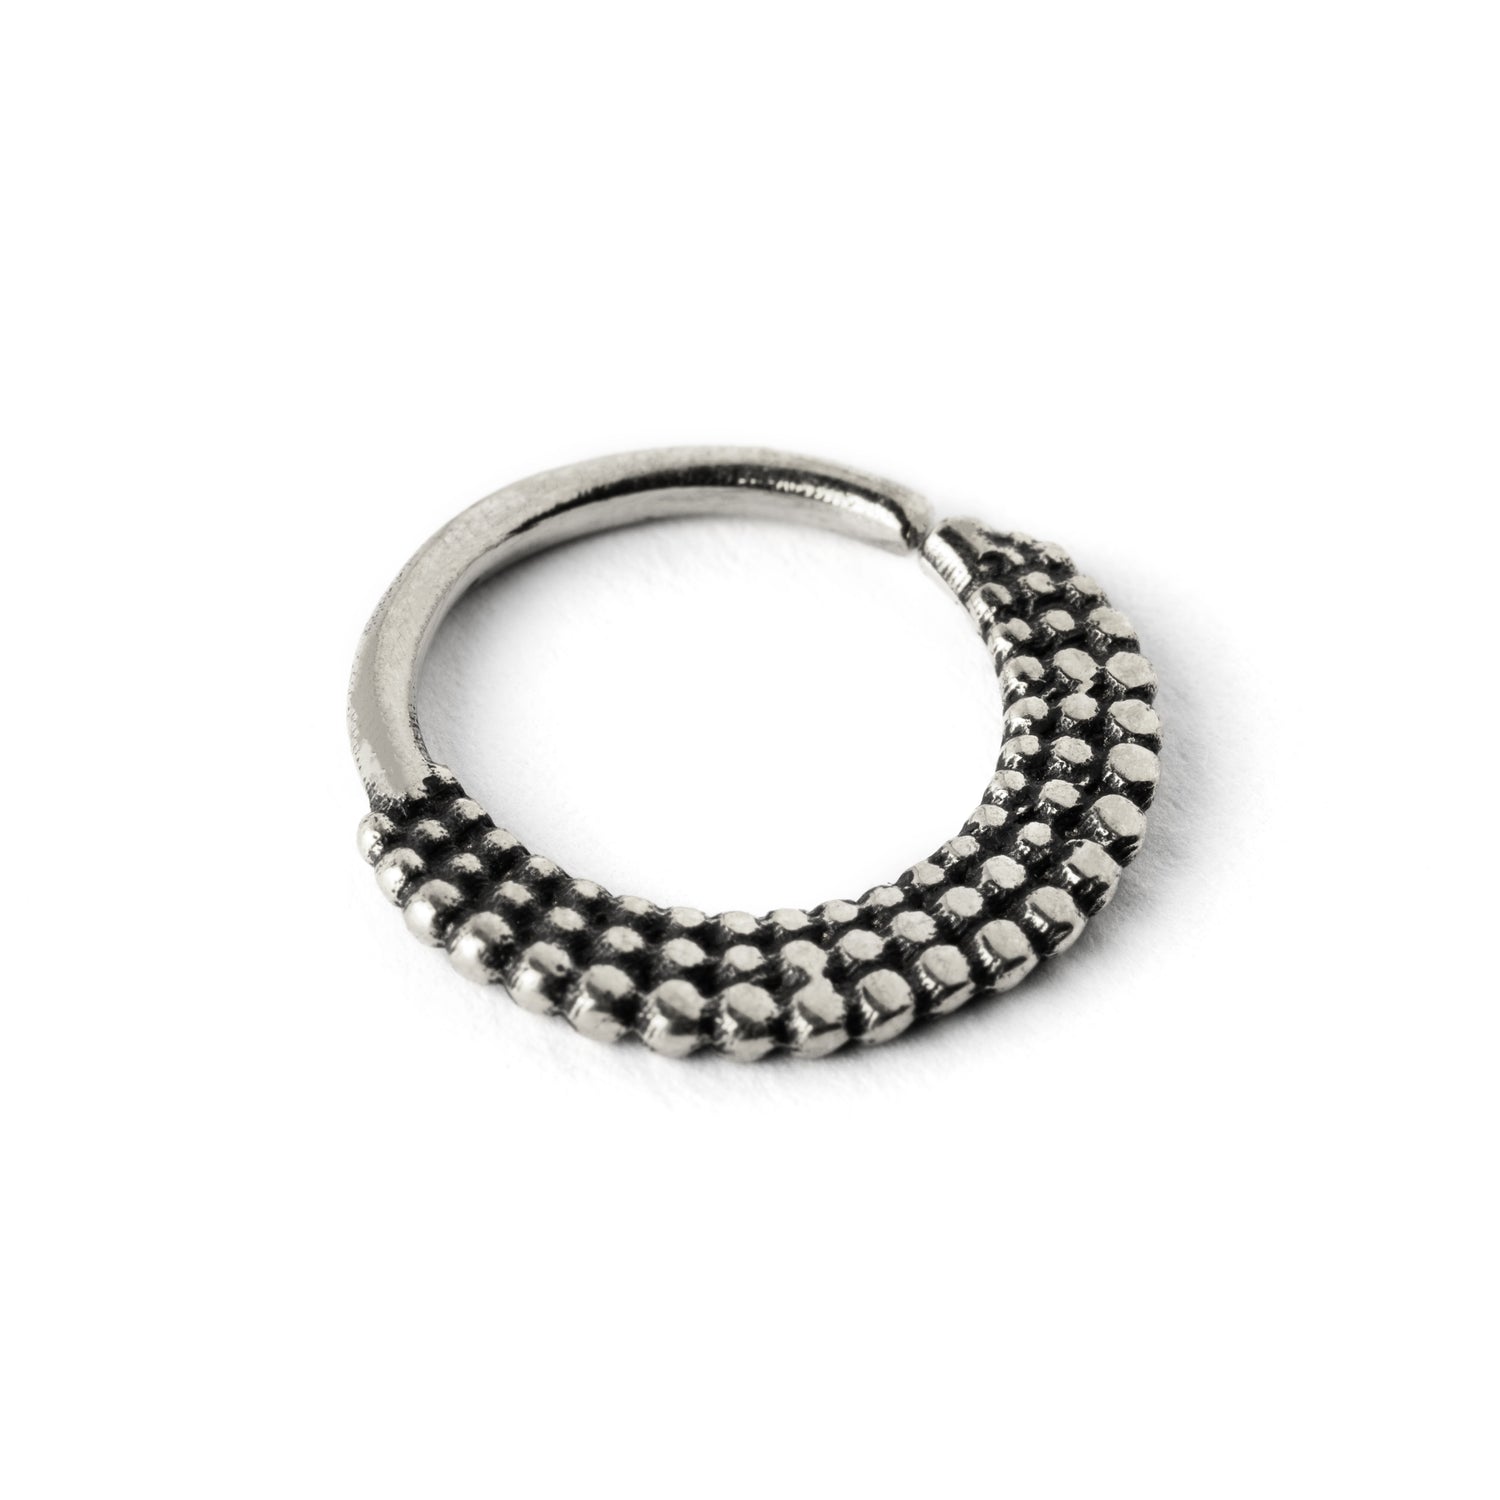 Ameya silver septum ring left side view